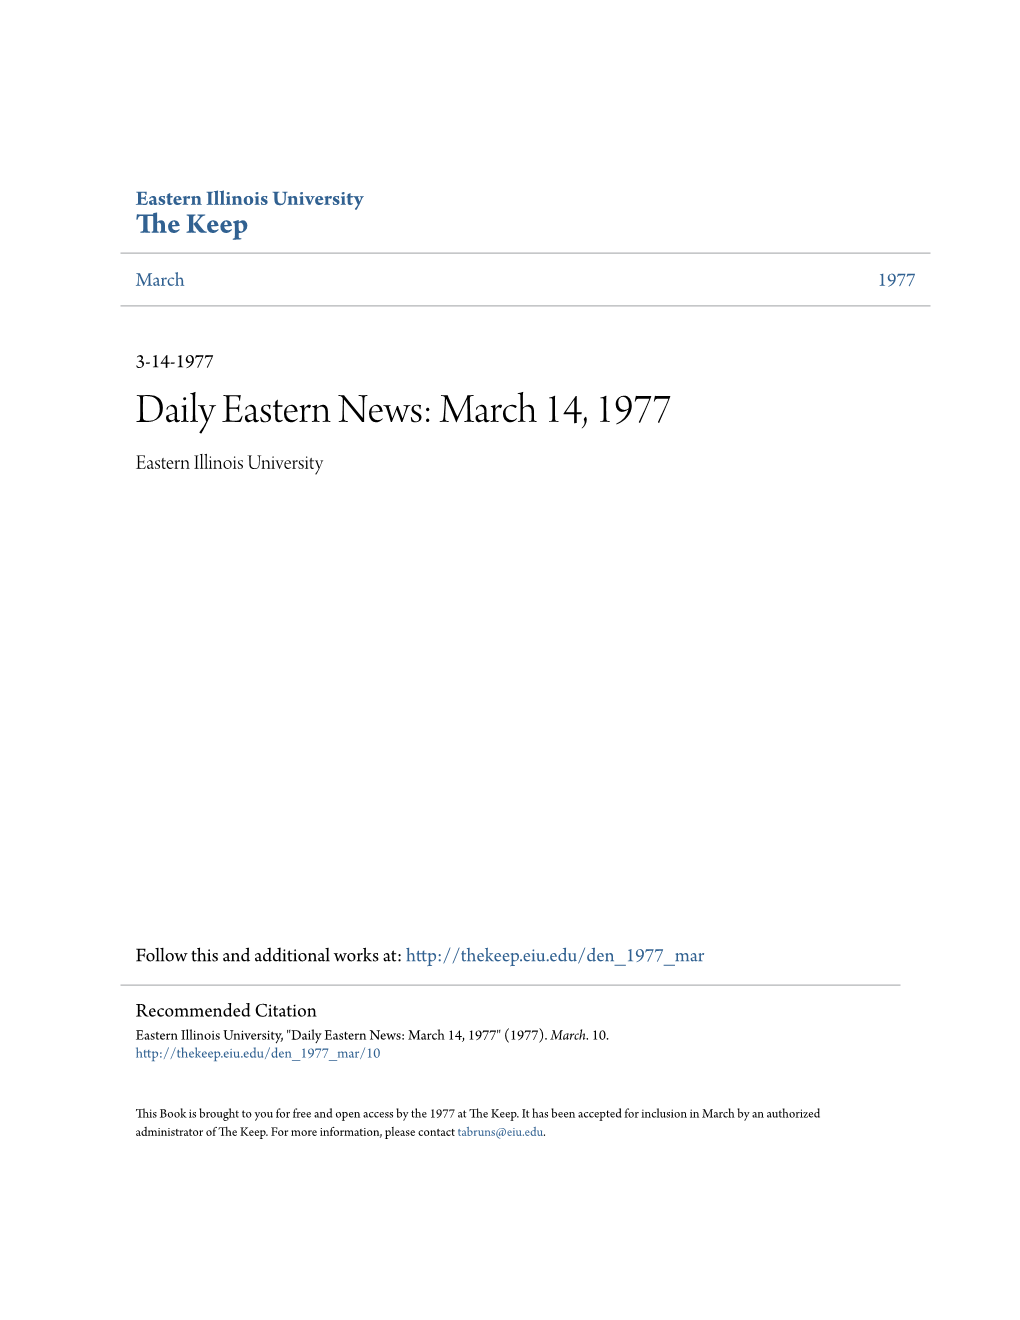 Daily Eastern News: March 14, 1977 Eastern Illinois University